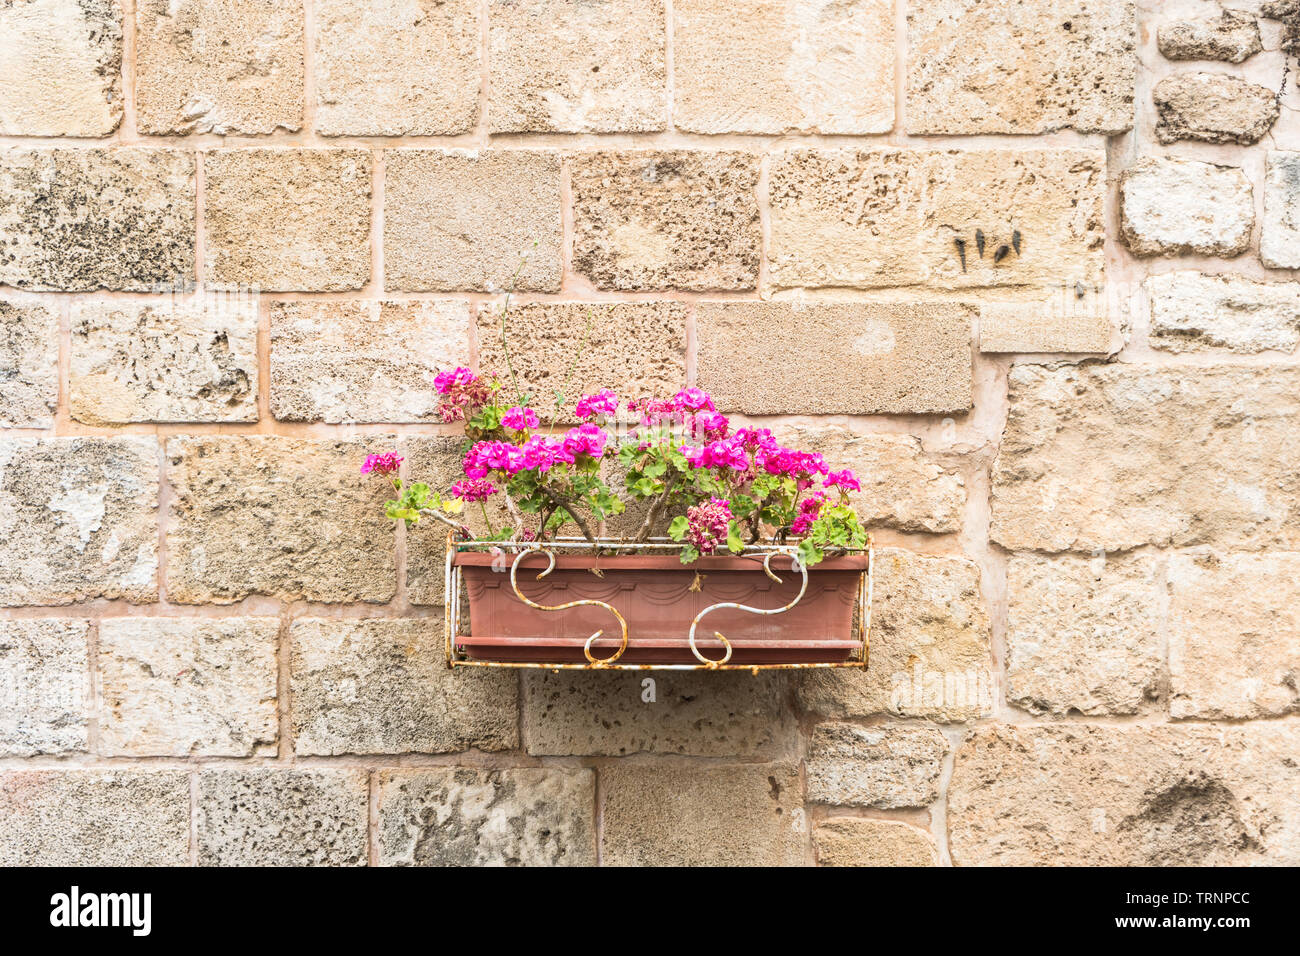 Pink flowers in an outdoor plastic planter against a plain old stone wall Stock Photo